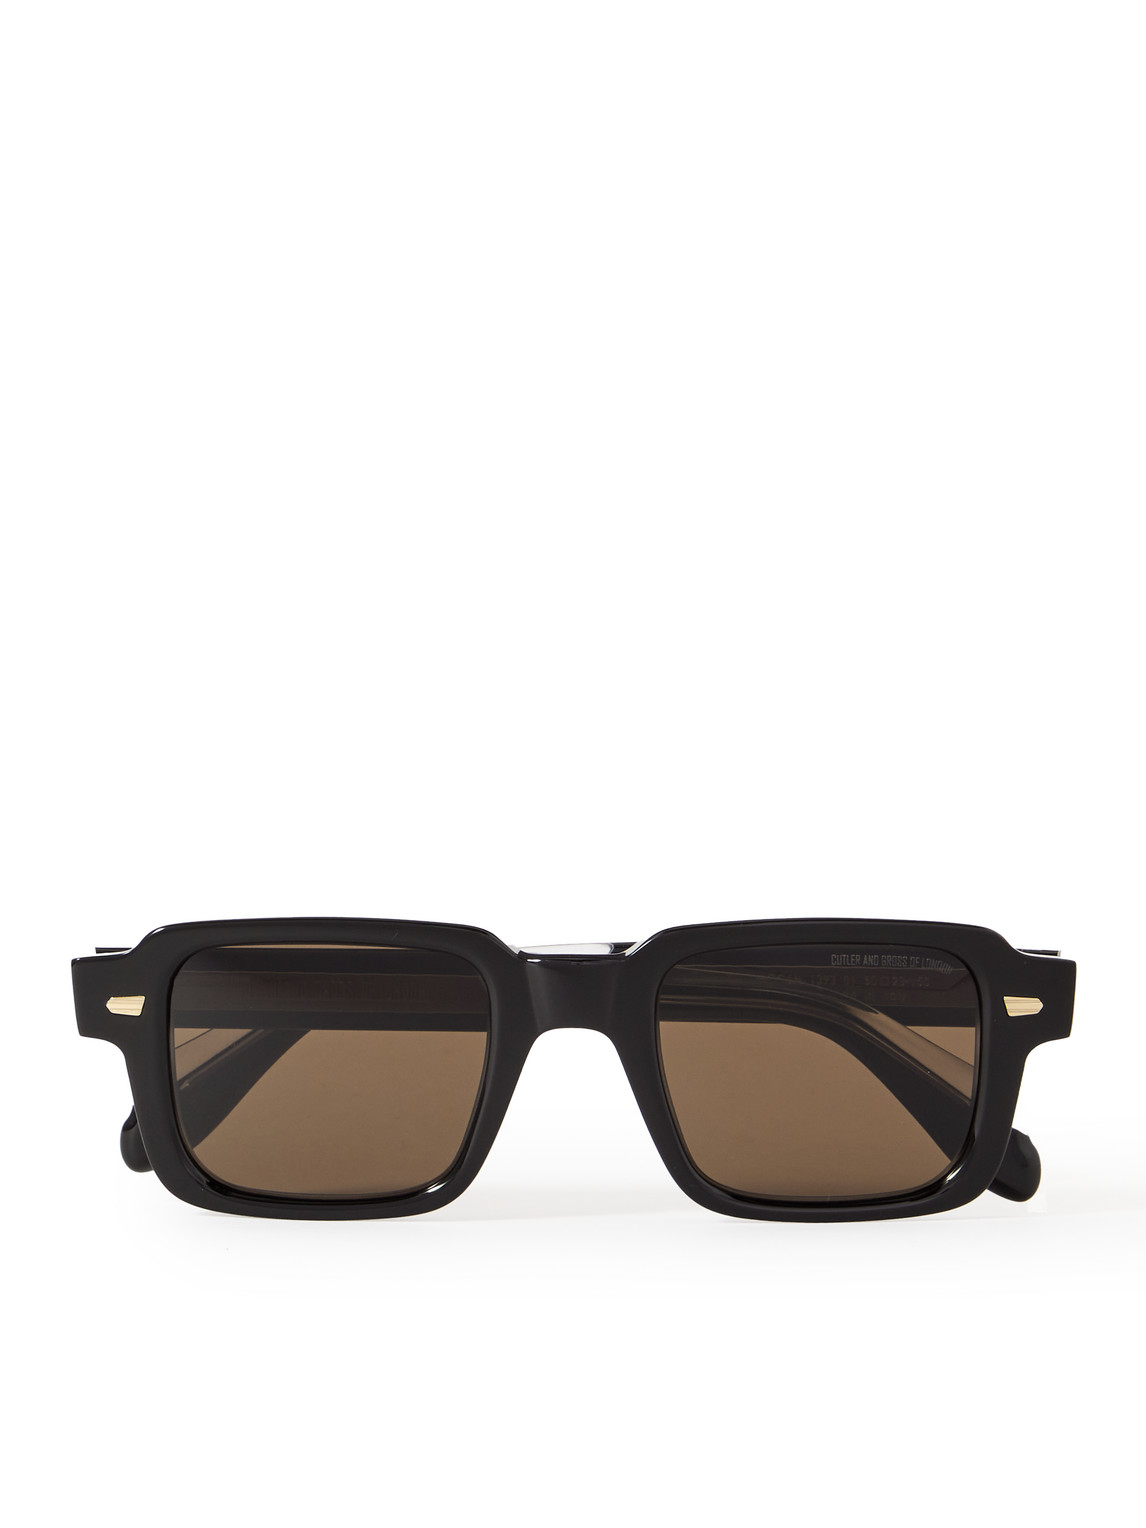 CUTLER AND GROSS 1393 SQUARE-FRAME ACETATE SUNGLASSES